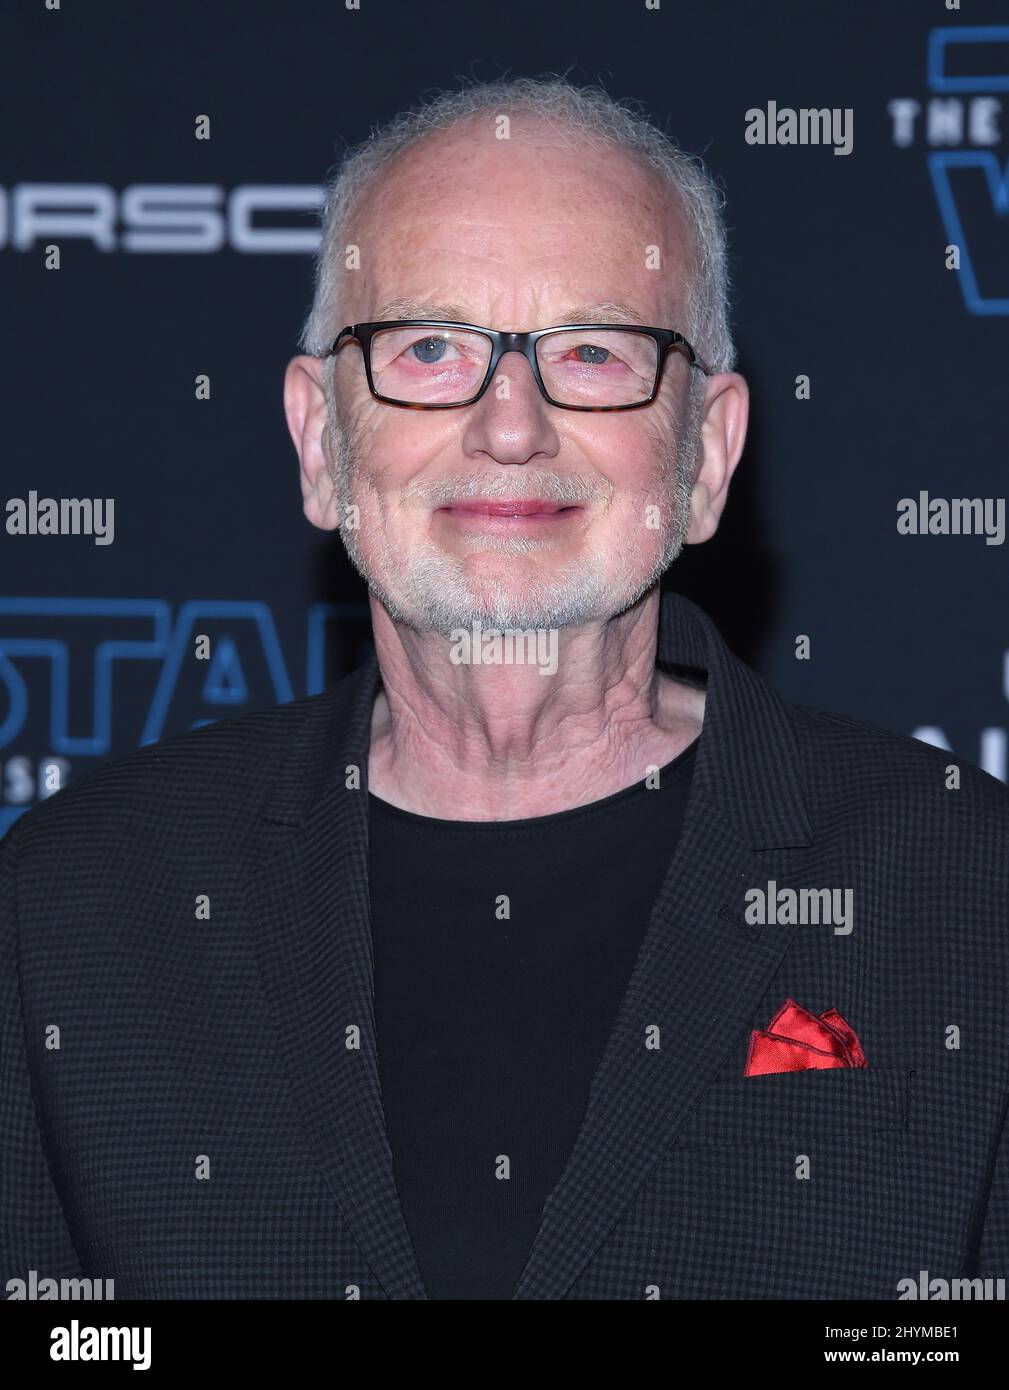 Ian McDiarmid attending the World Premiere of Star Wars: The Rise of Skywalker in Los Angeles Stock Photo